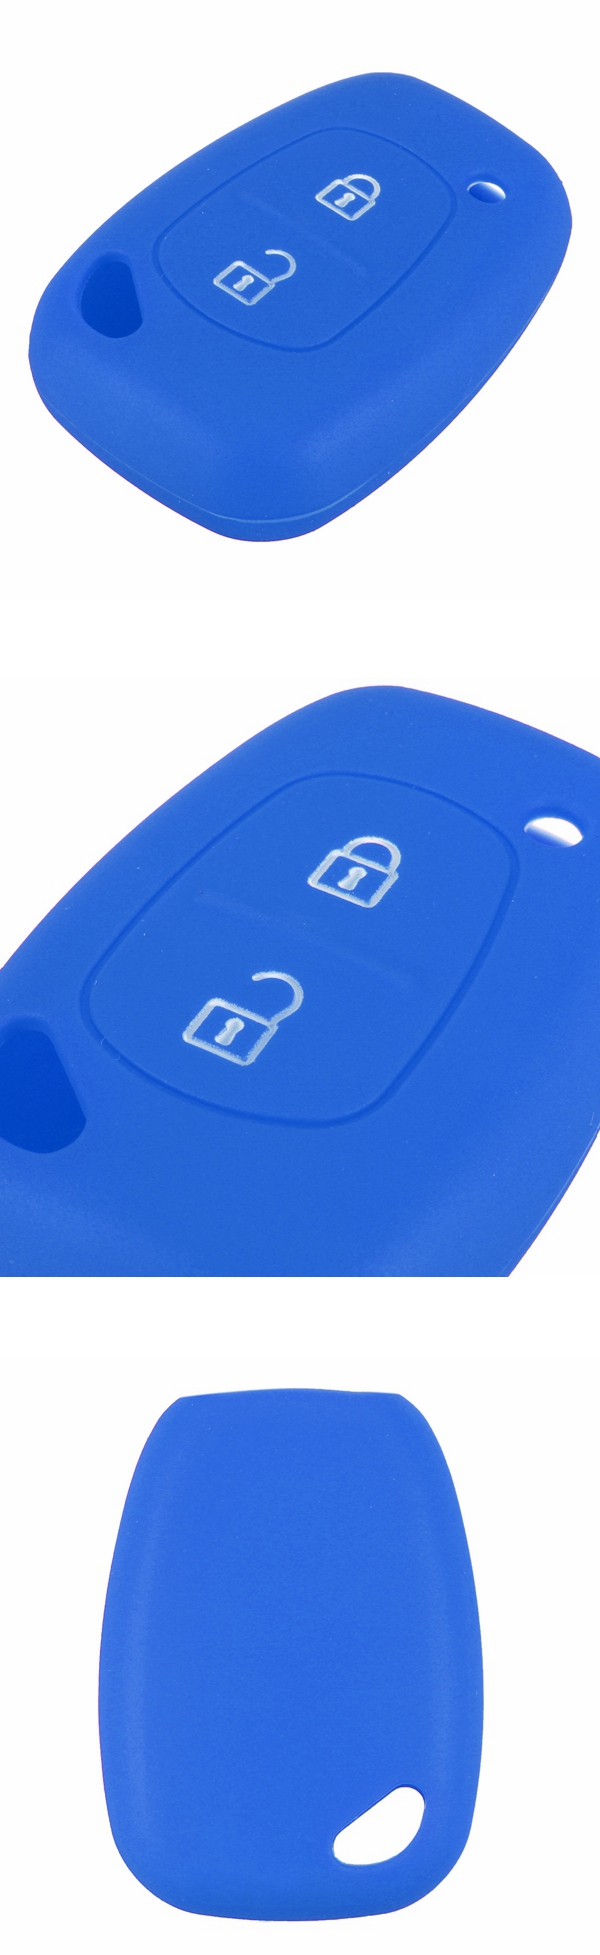 2 Button Soft Silicone Smart Key Fob Case Cover voor Renault Kangoo Master Trafic